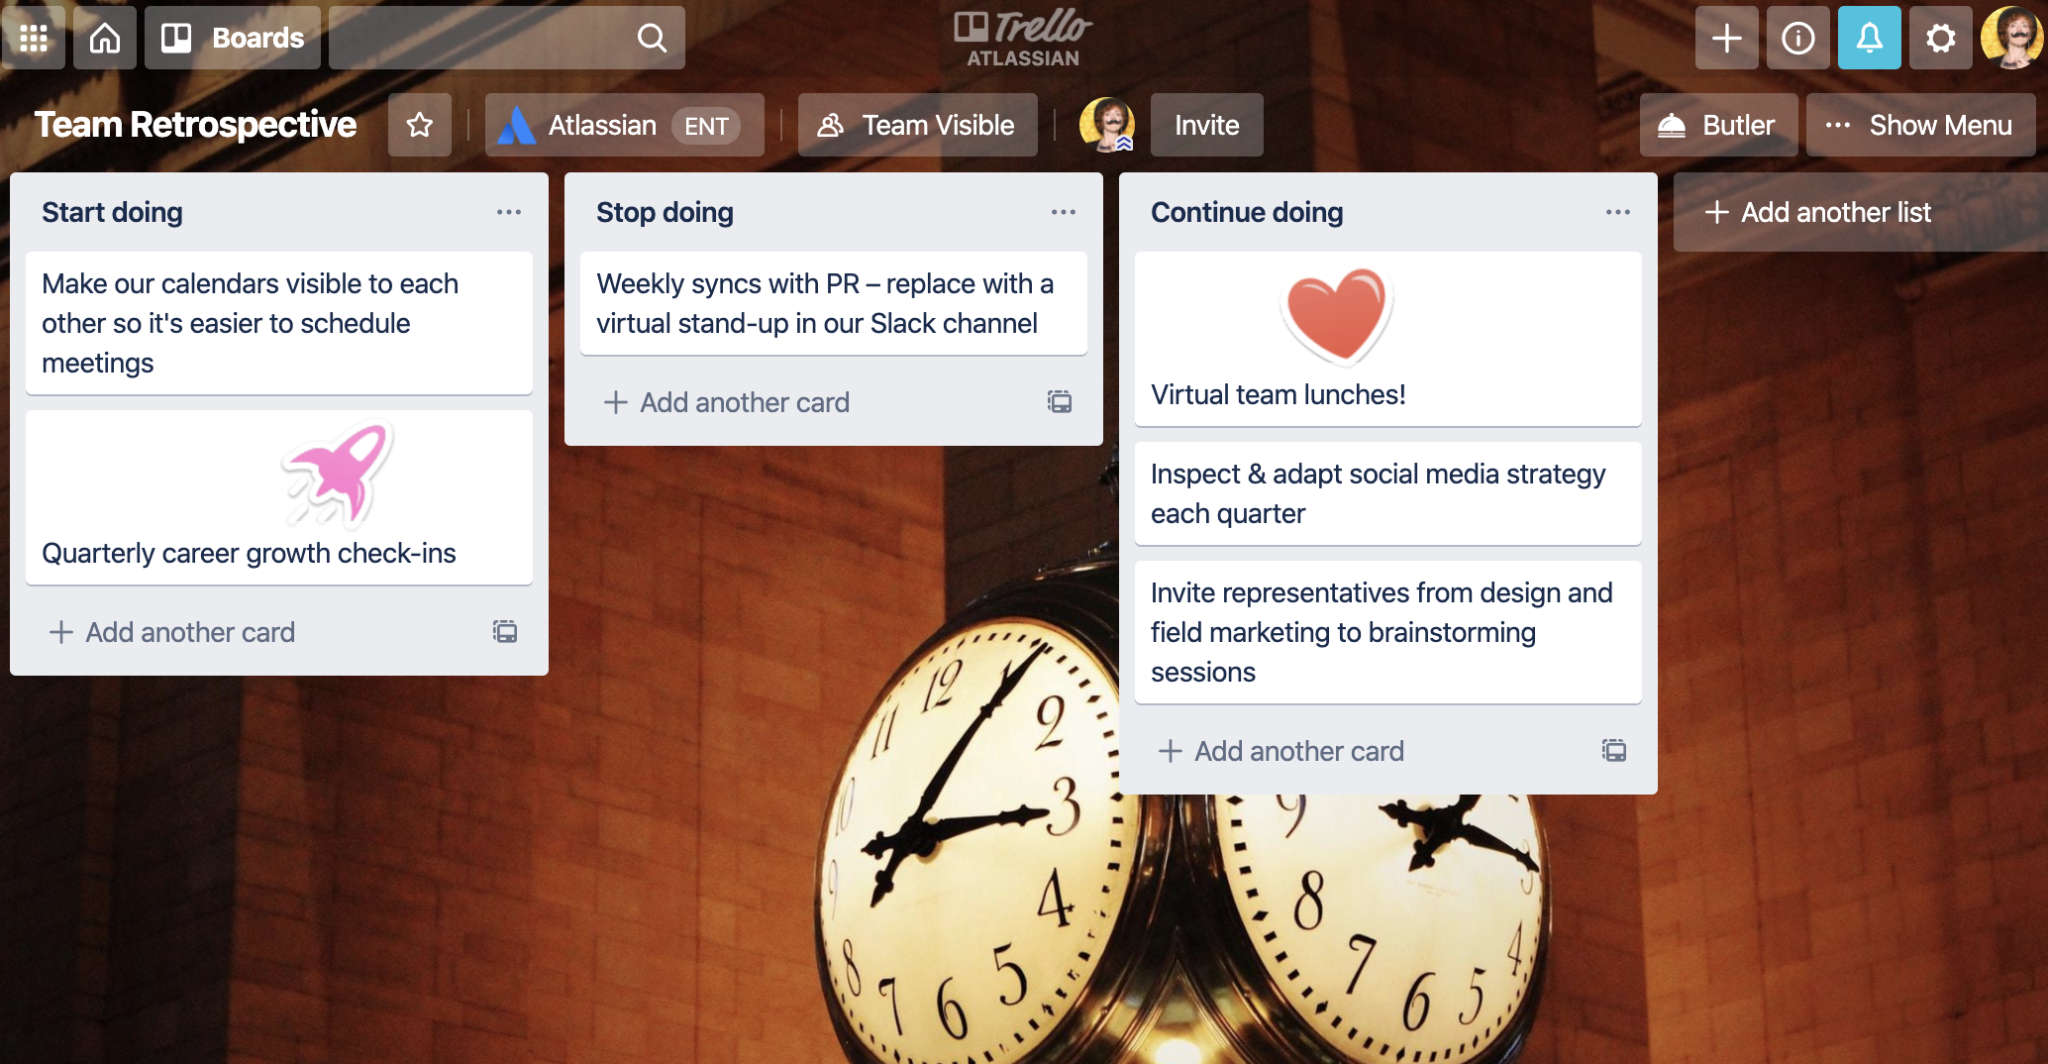 Example of a Trello board with lists for things to stop, start, and continue doing